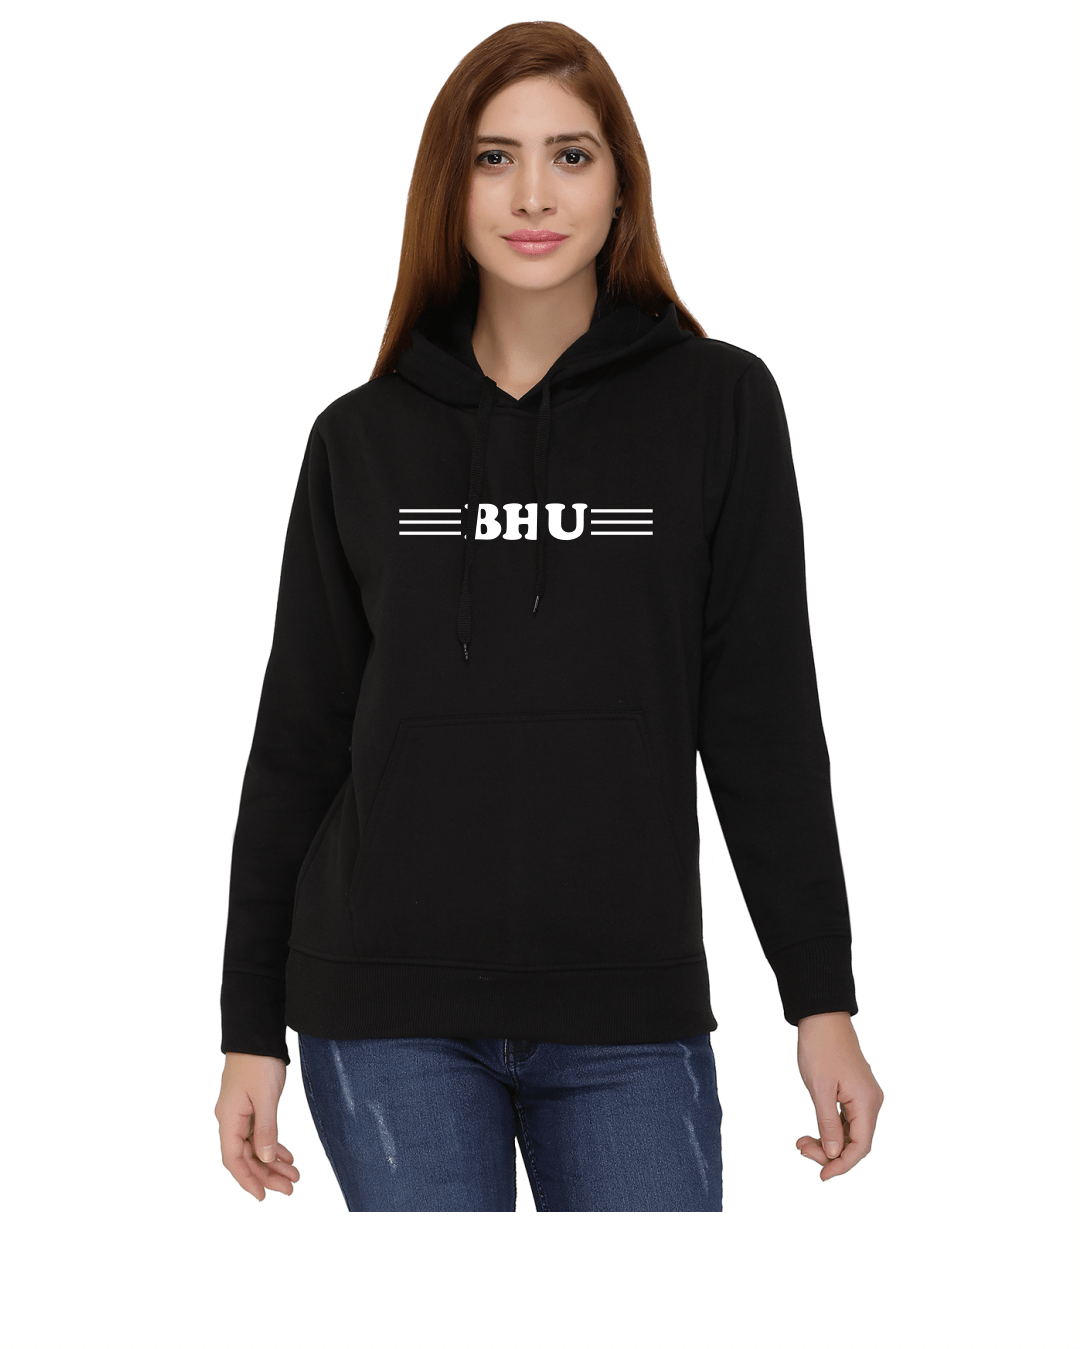 BHU Hoodies for Women with print – My Campus Store